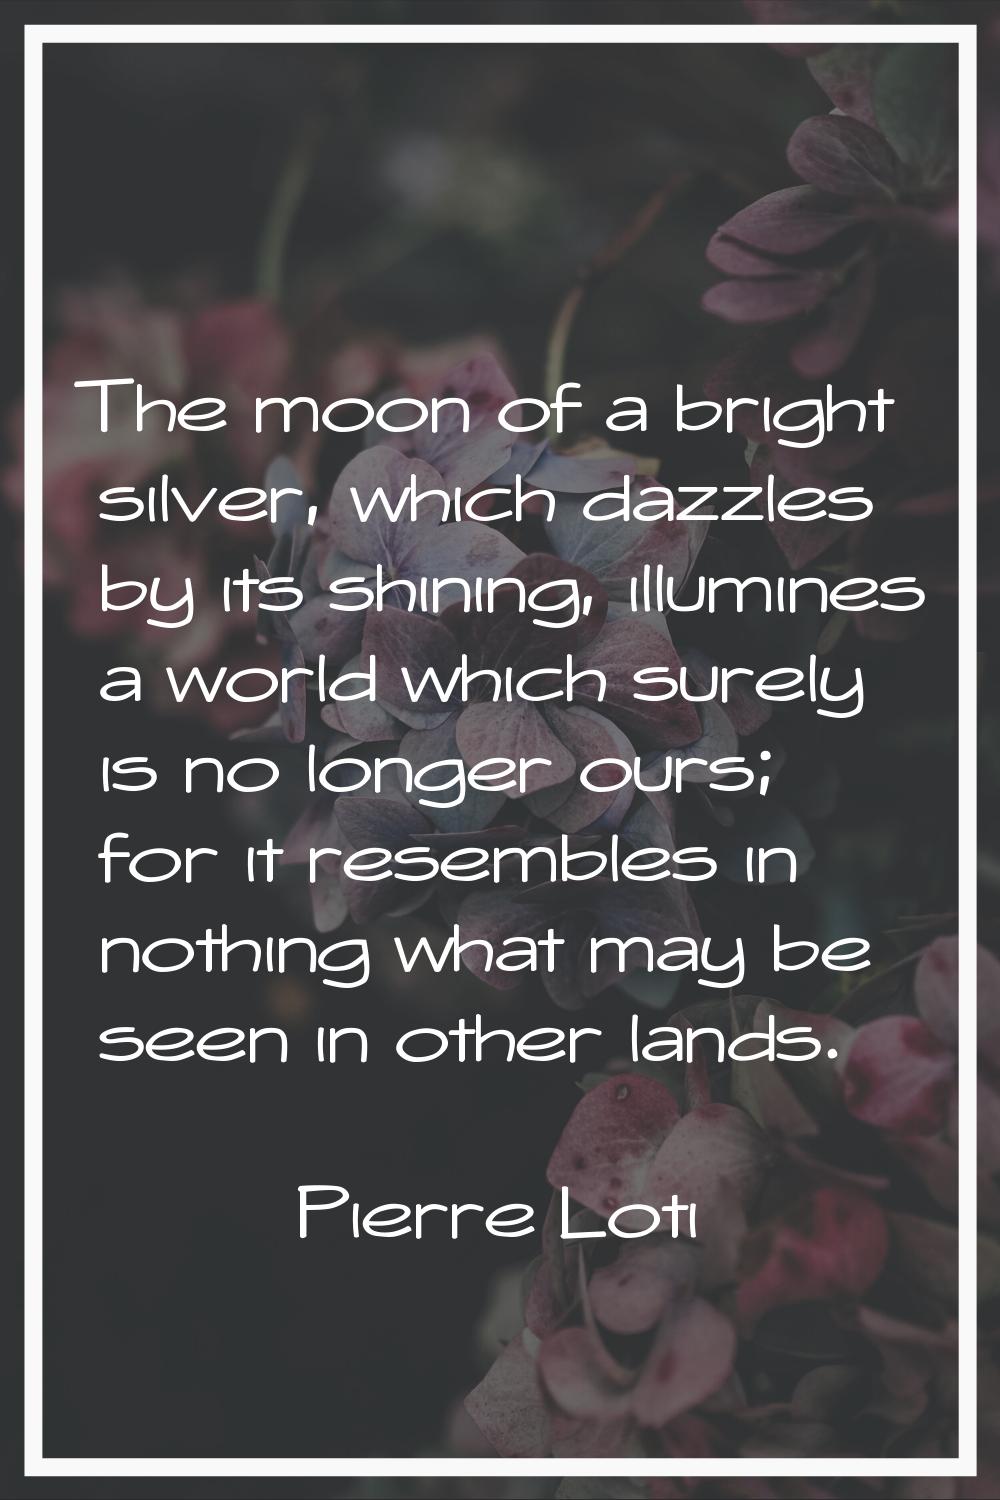 The moon of a bright silver, which dazzles by its shining, illumines a world which surely is no lon